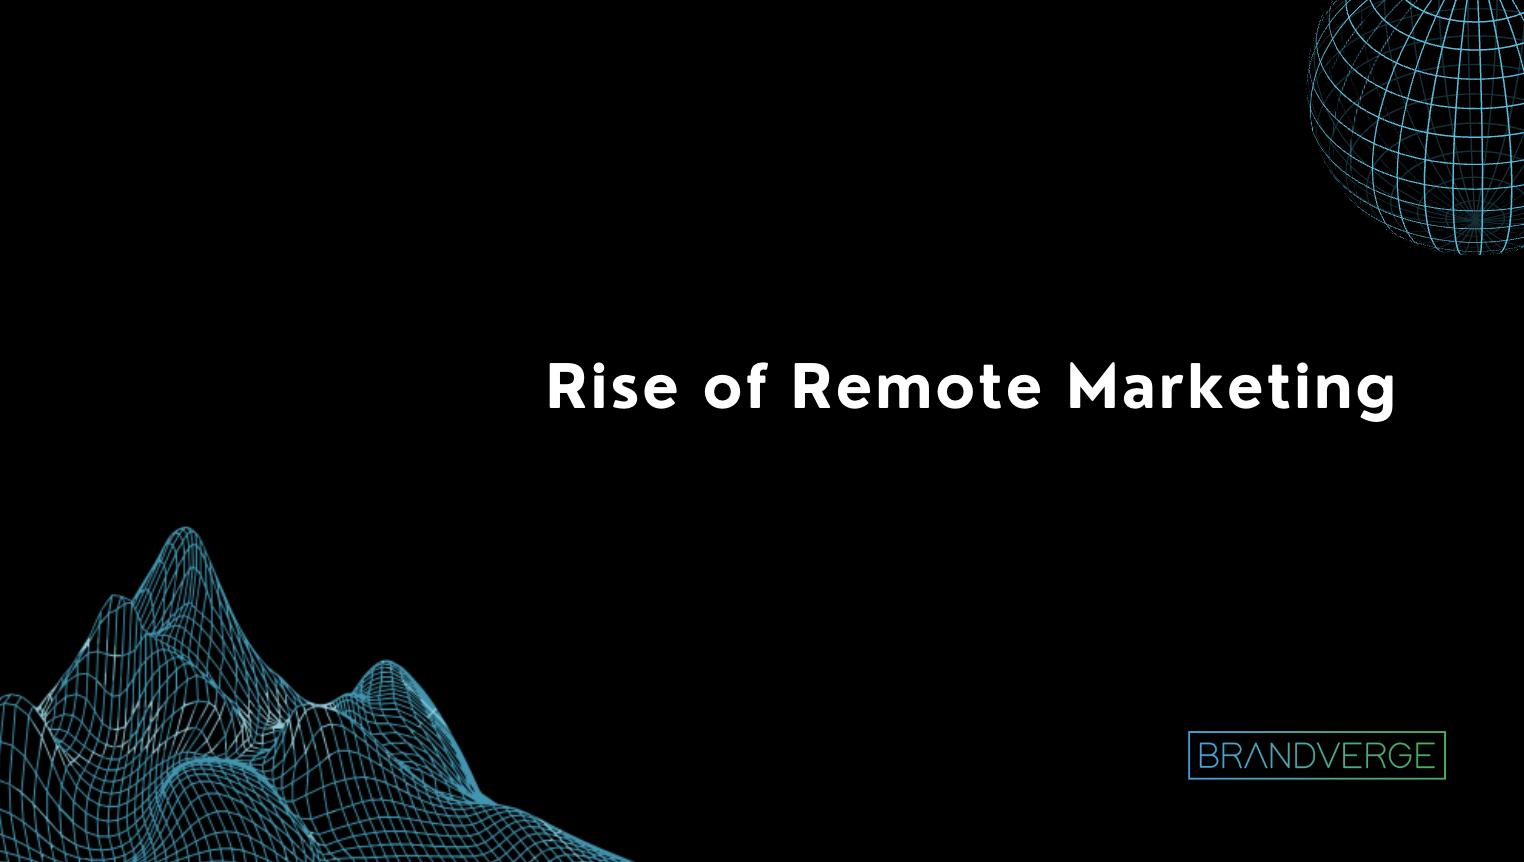 The Rise of Remote Marketing